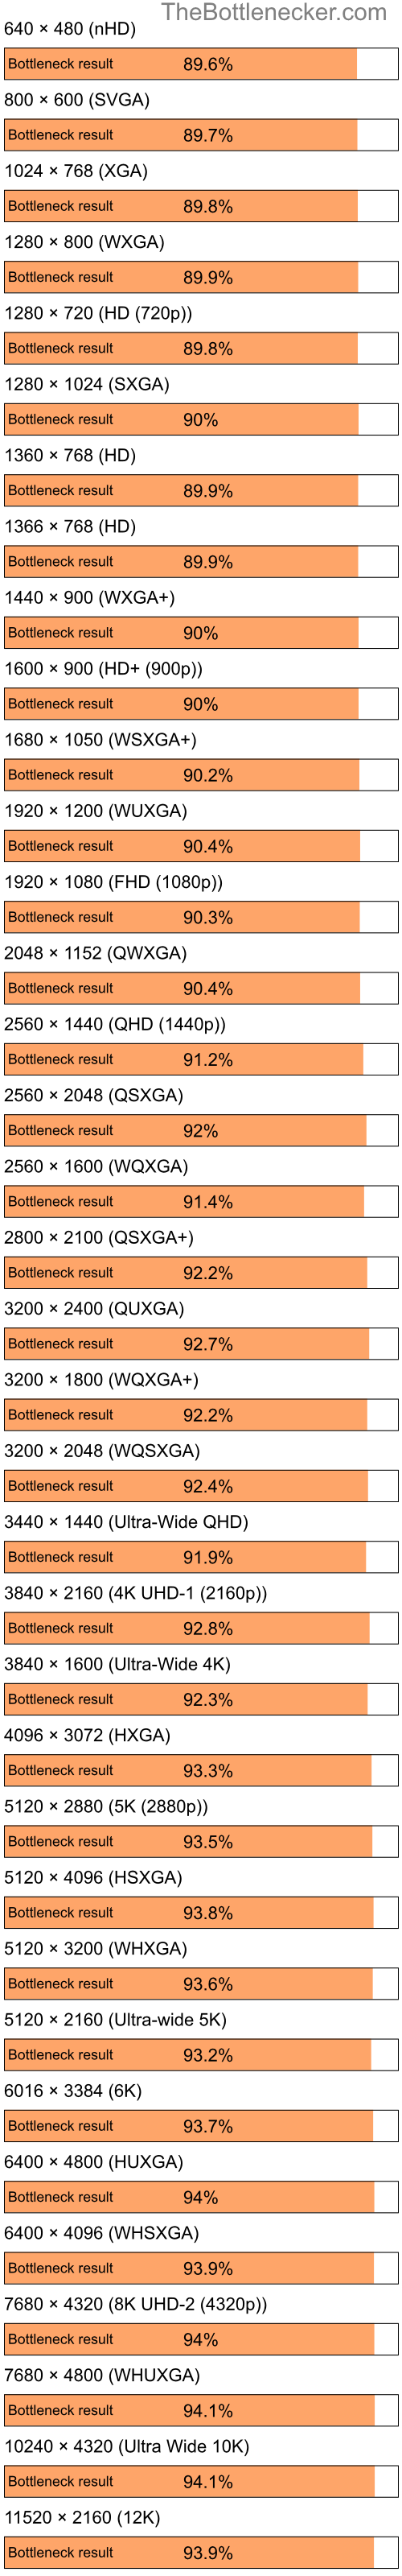 Bottleneck results by resolution for Intel Pentium 4 and NVIDIA GeForce2 MX in Processor Intense Tasks